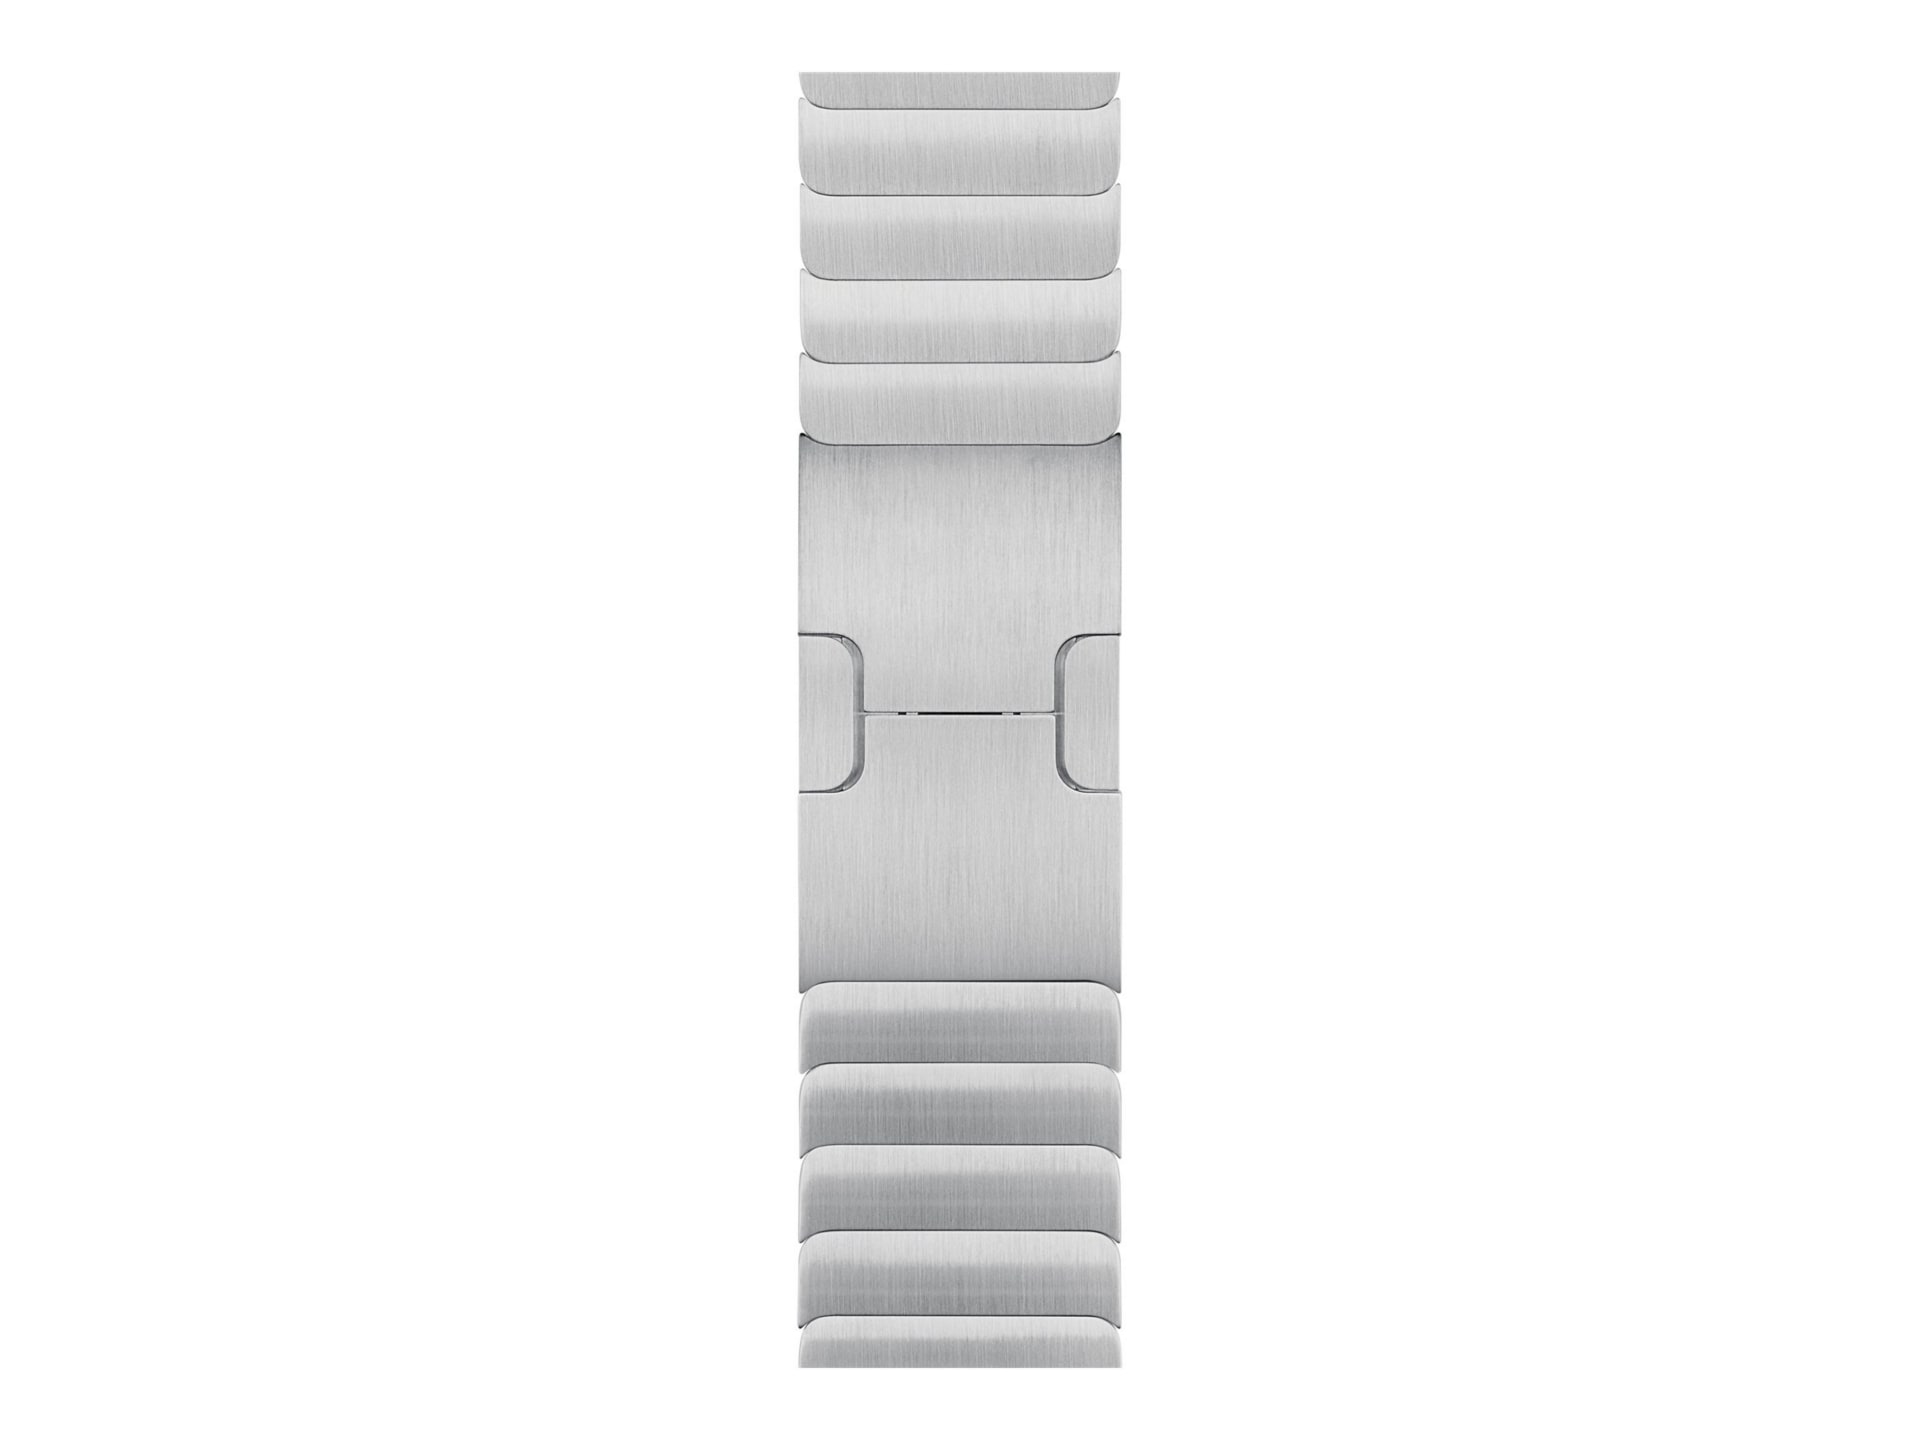 Apple - strap for smart watch - 38mm